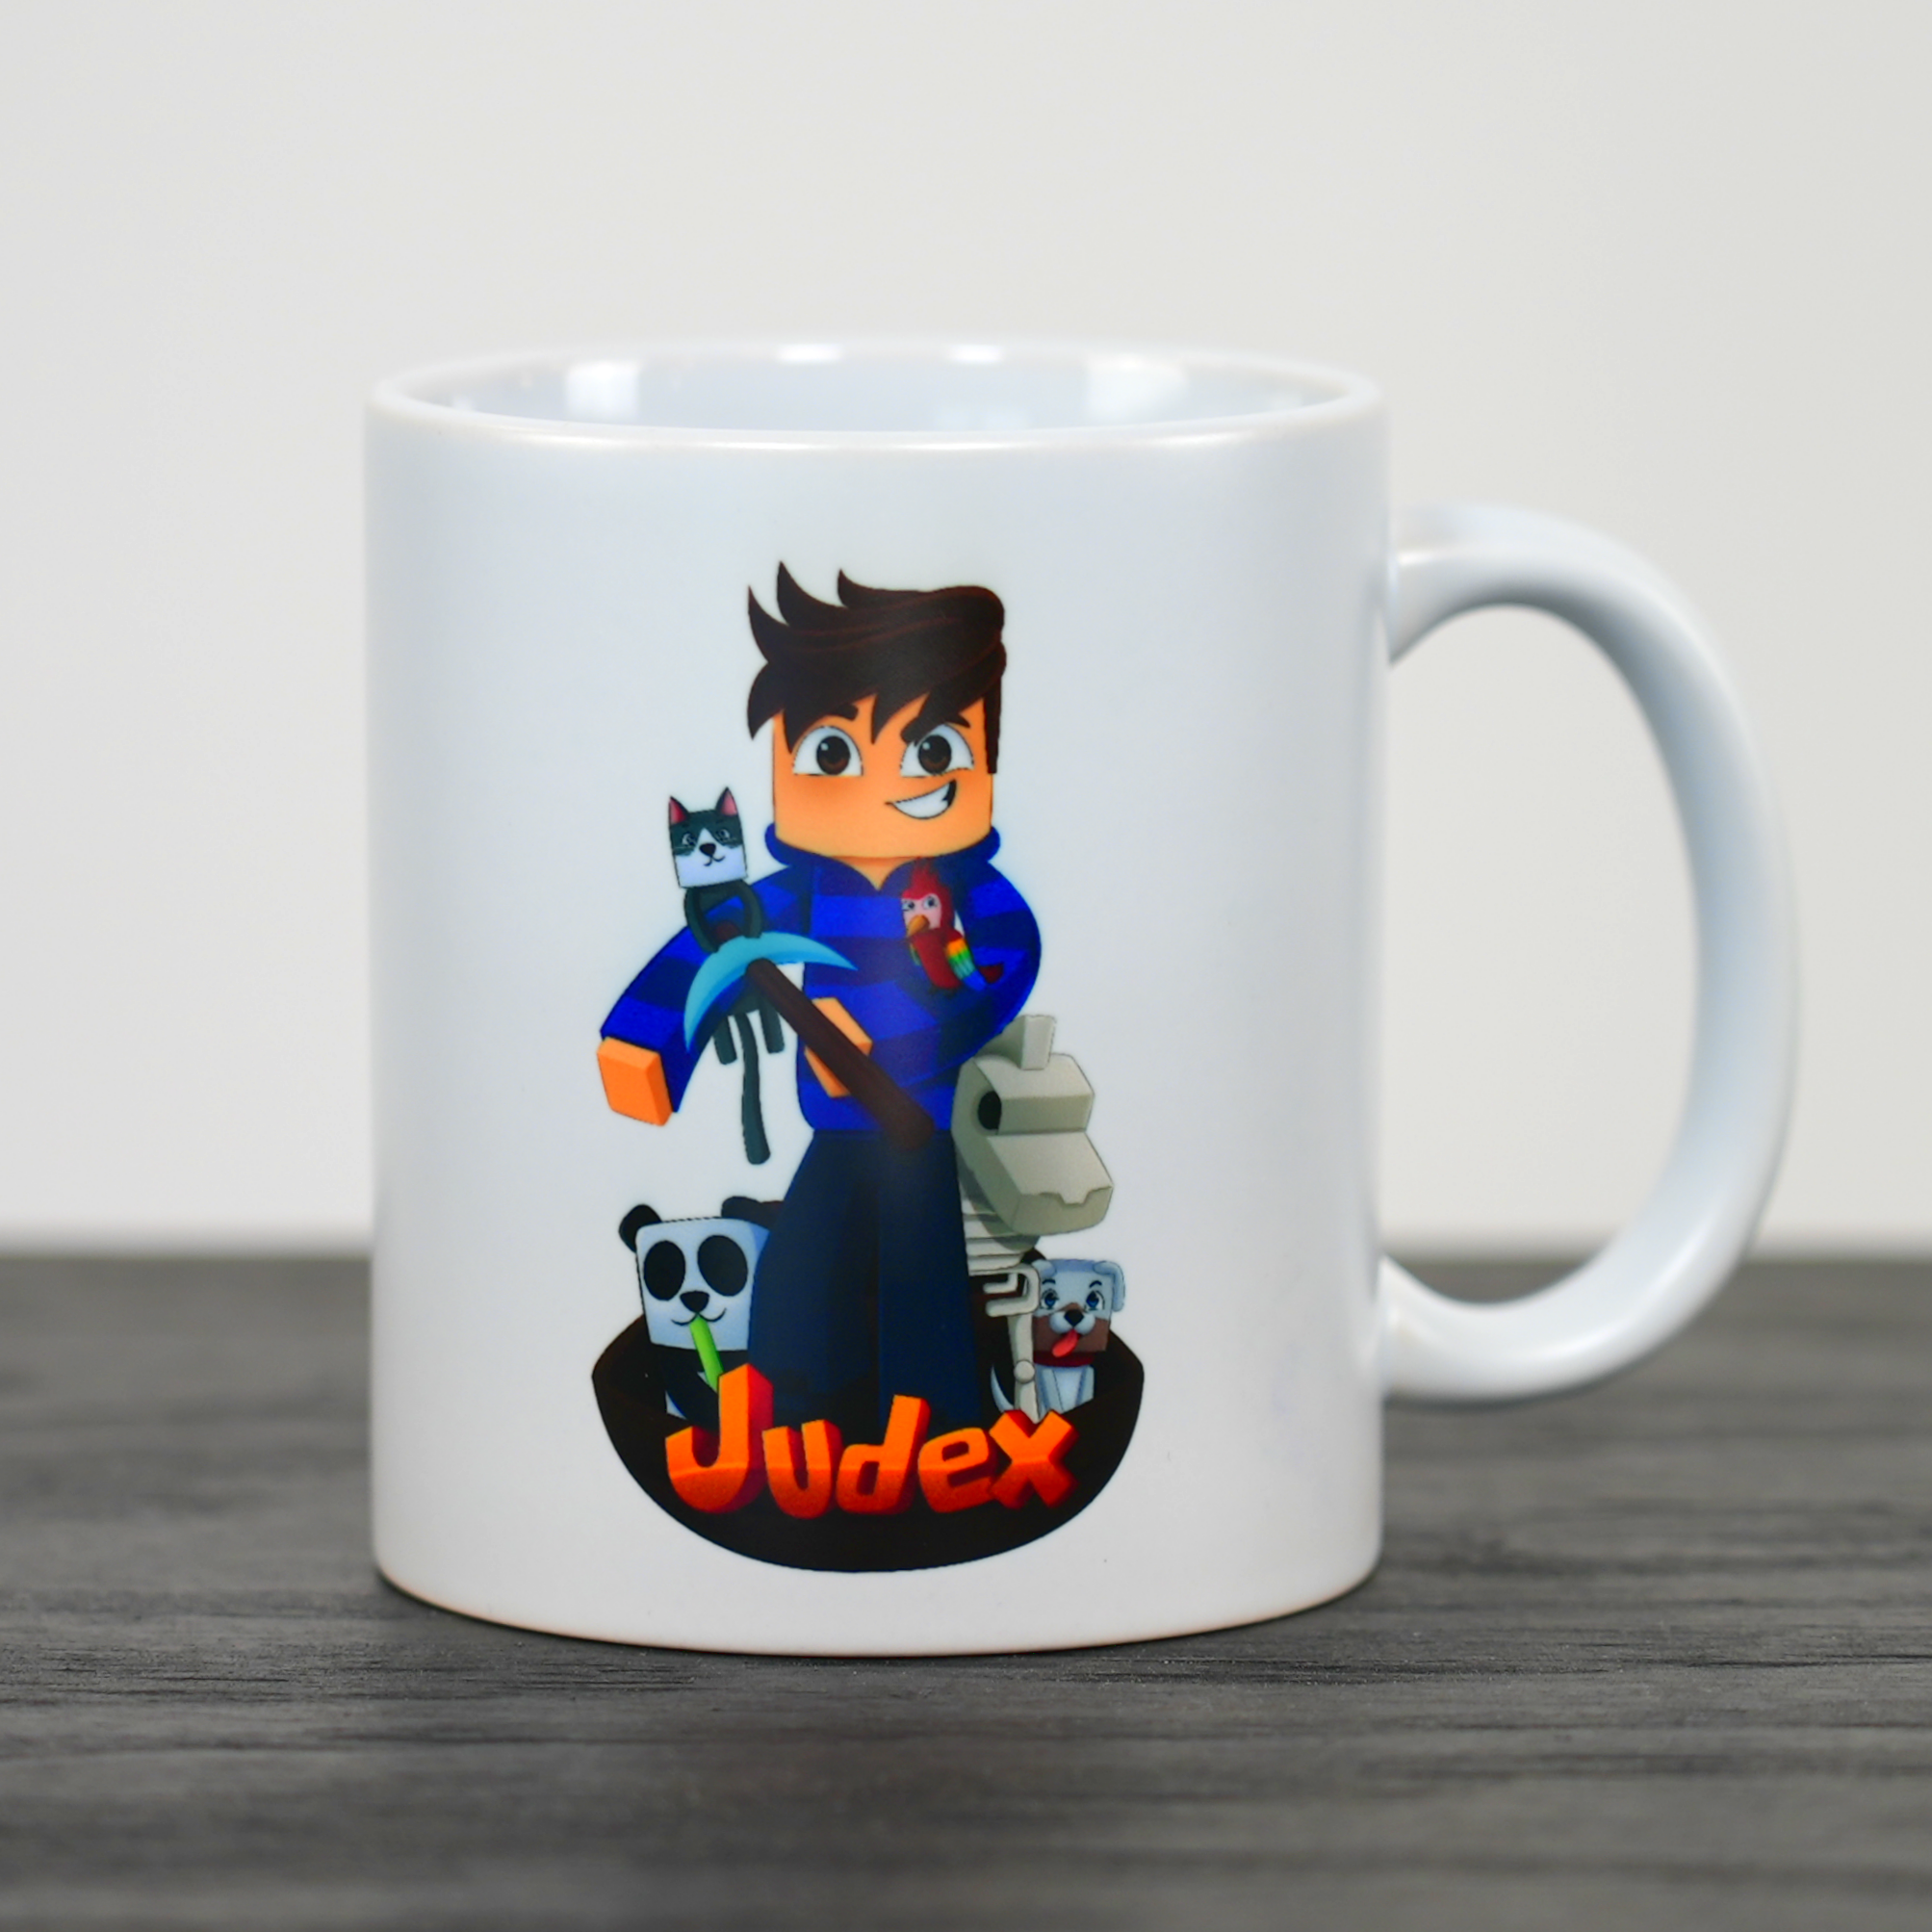 Judex King Of The Beasts Cup